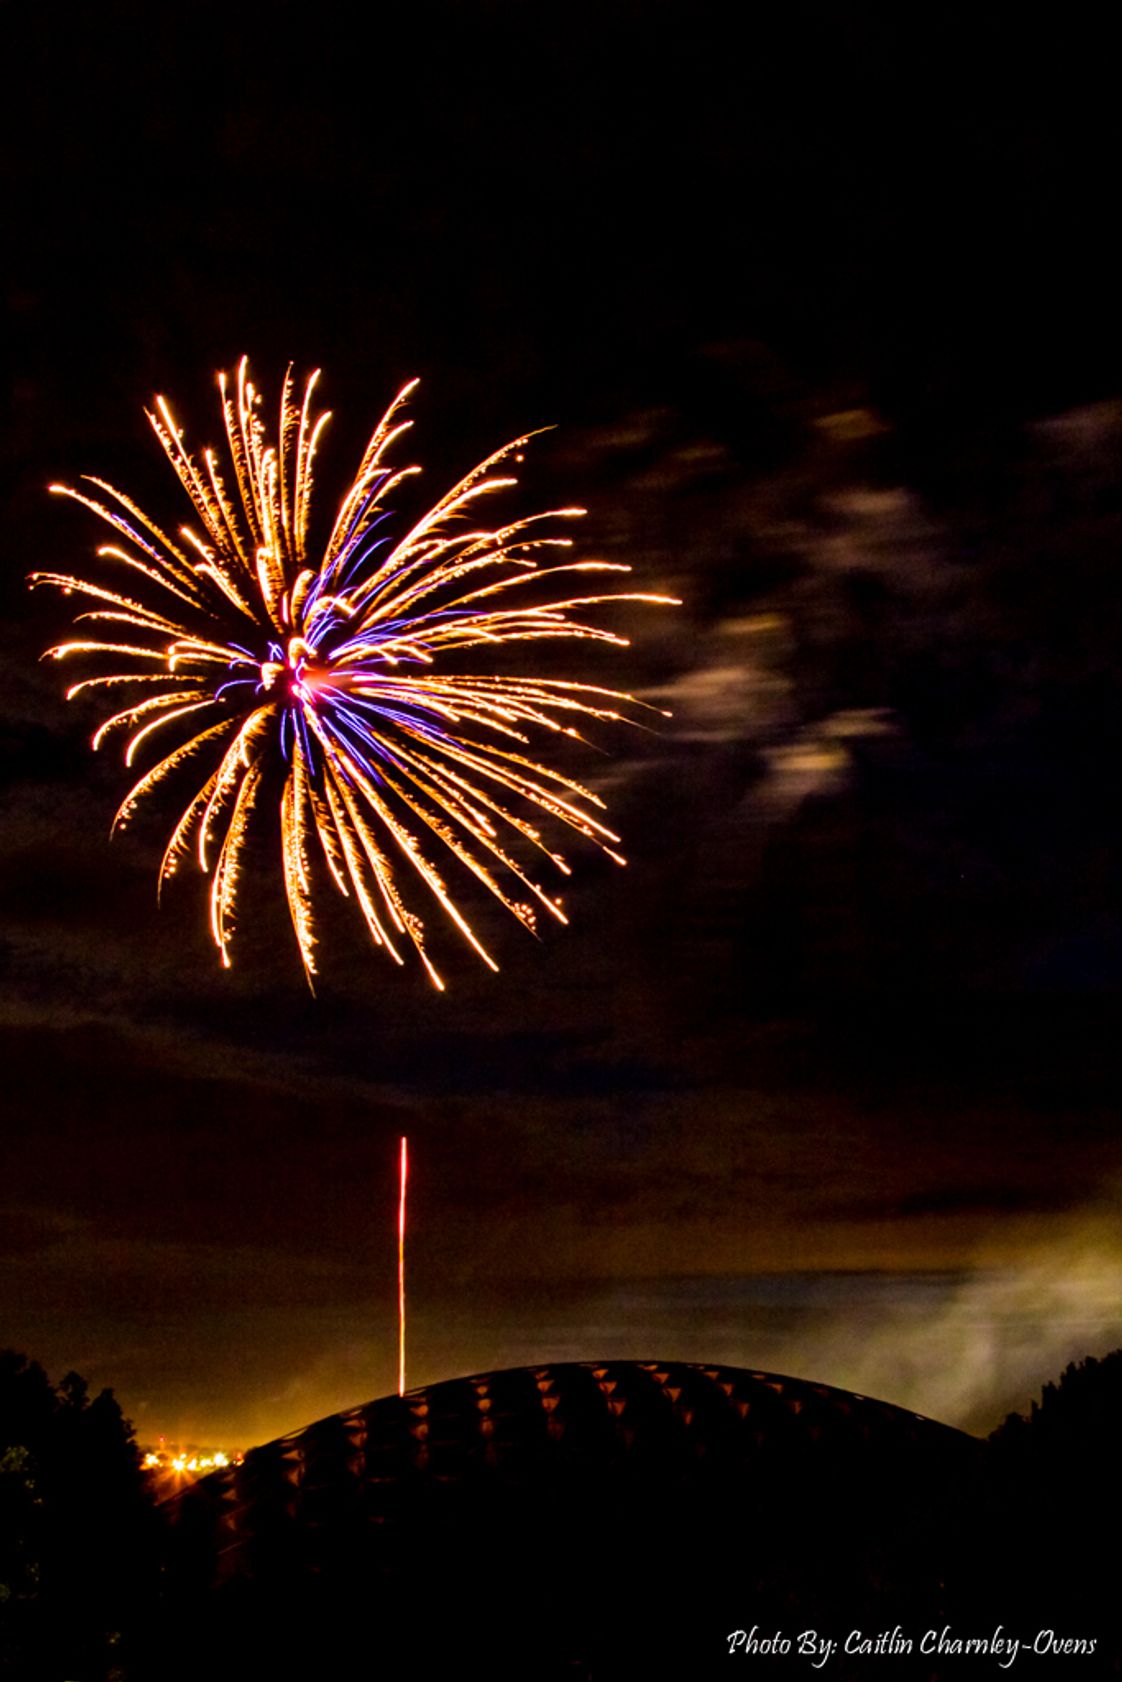 Walla Walla Community College Photo - The Fourth of July is celebrated with fireworks over the Dietrich Dome on Walla Walla Community College's campus